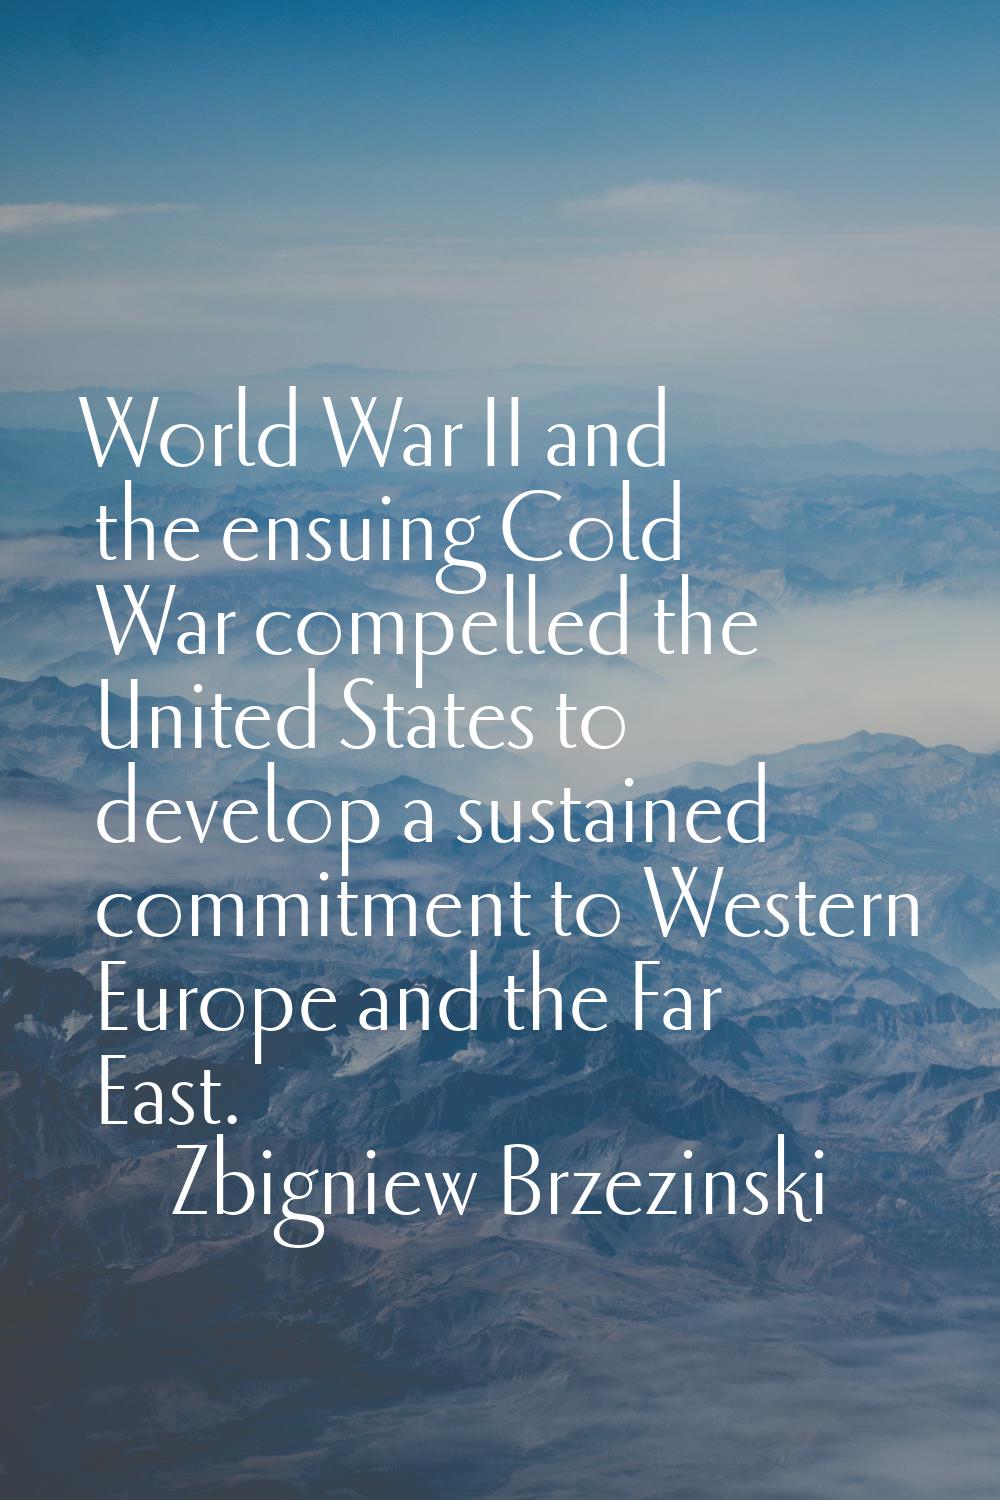 World War II and the ensuing Cold War compelled the United States to develop a sustained commitment